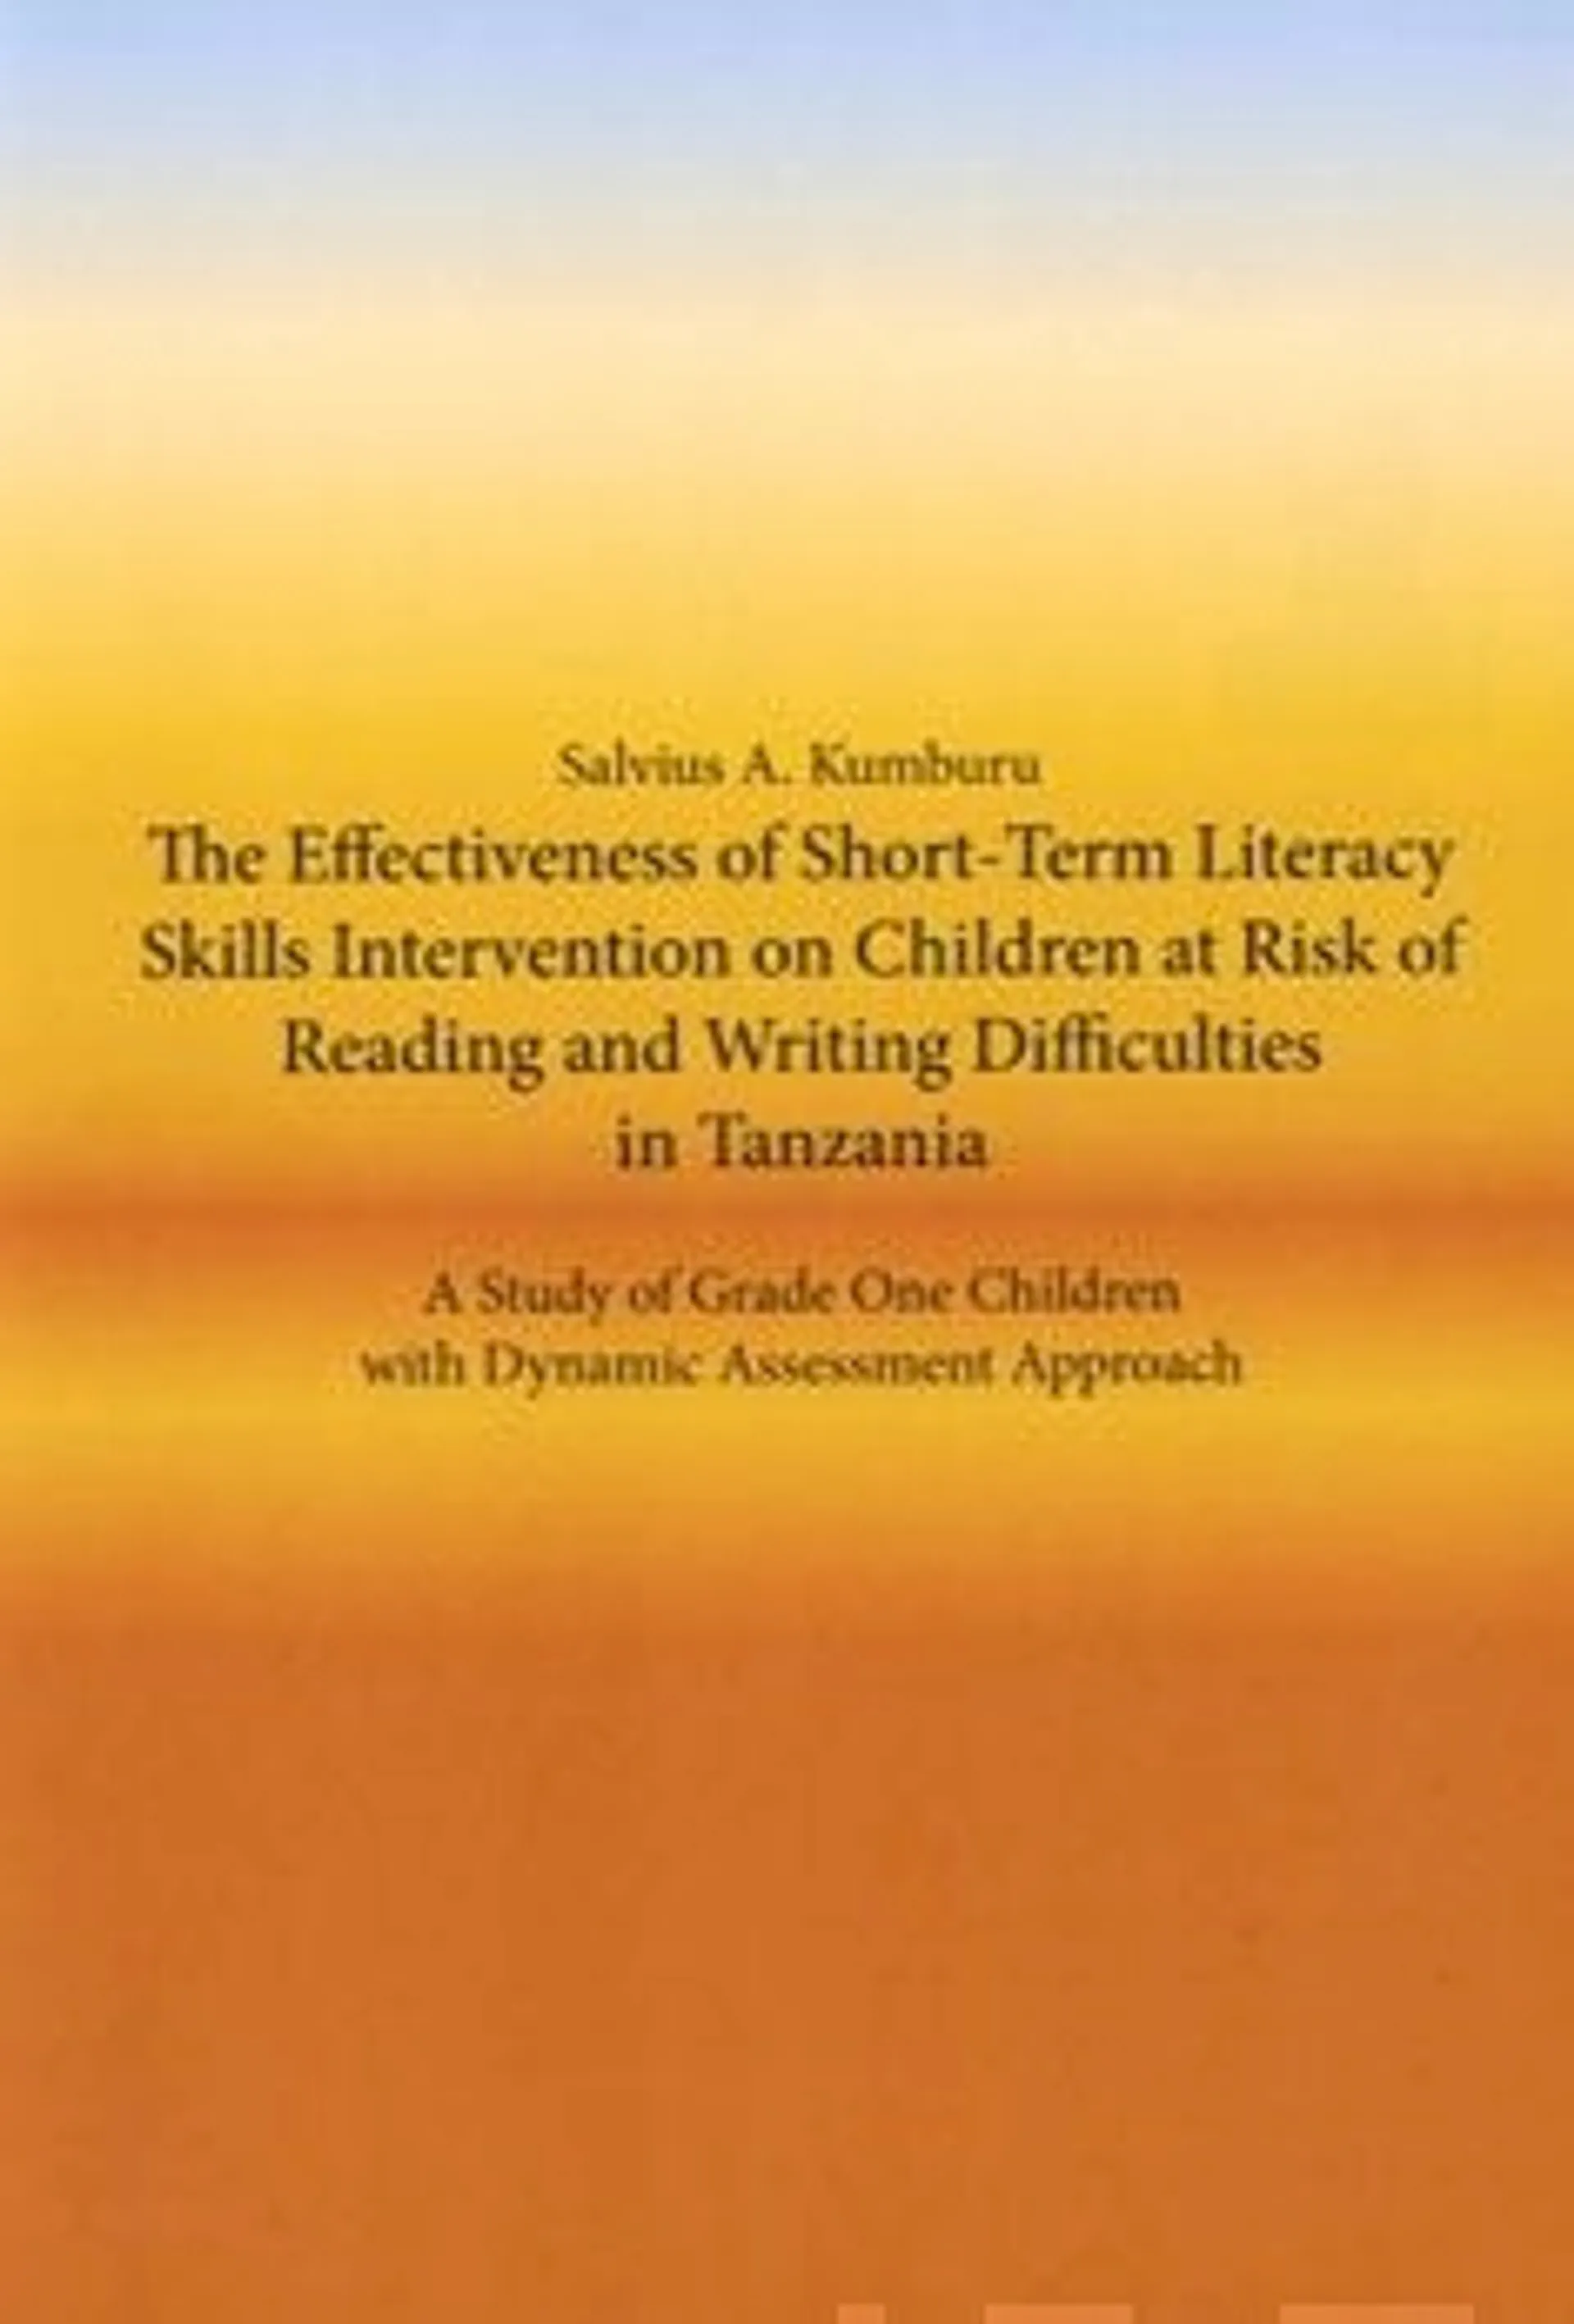 Kumburu, The Effectiviness of Short-Term Literacy Skills Intervention on Children at Risk of Reading and Writing Difficulties in Tanzania